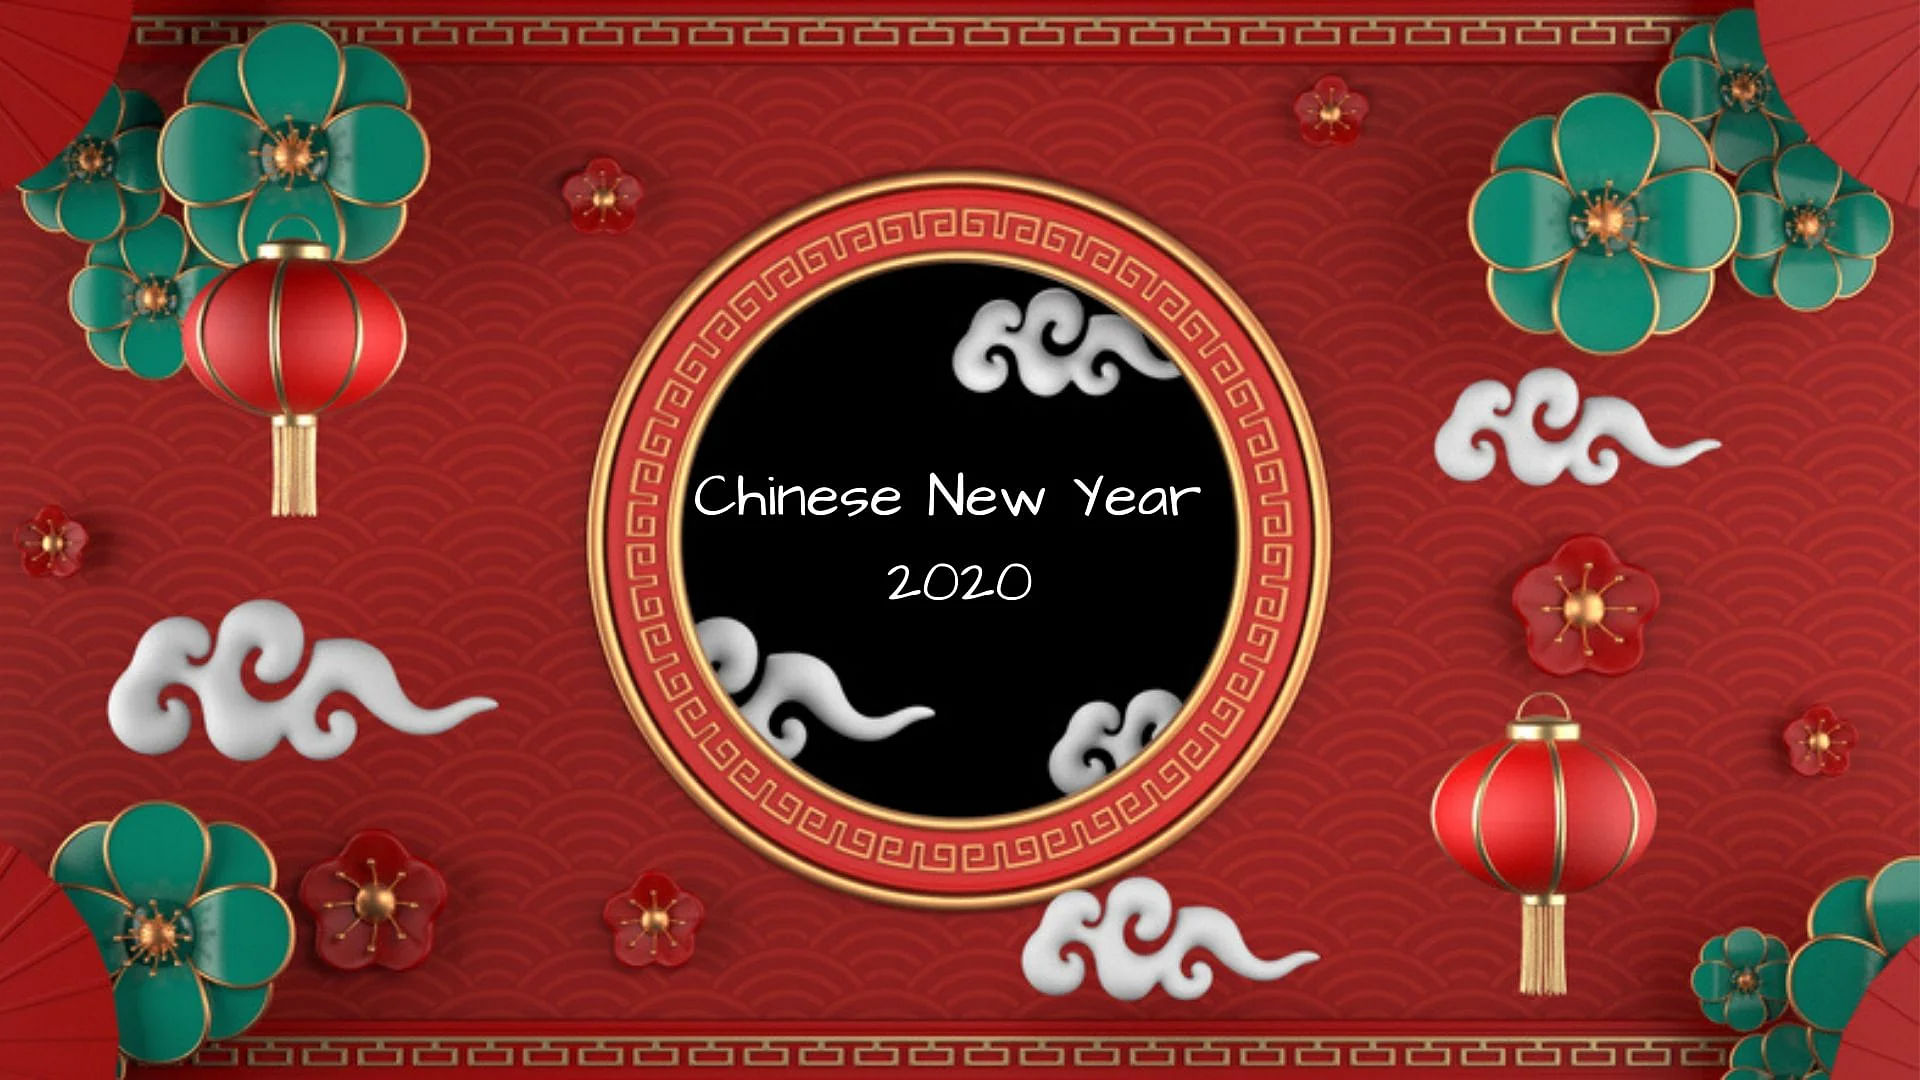 Happy Chinese New Year 2020 wishes, greetings cards, images with quotes for firends and family.